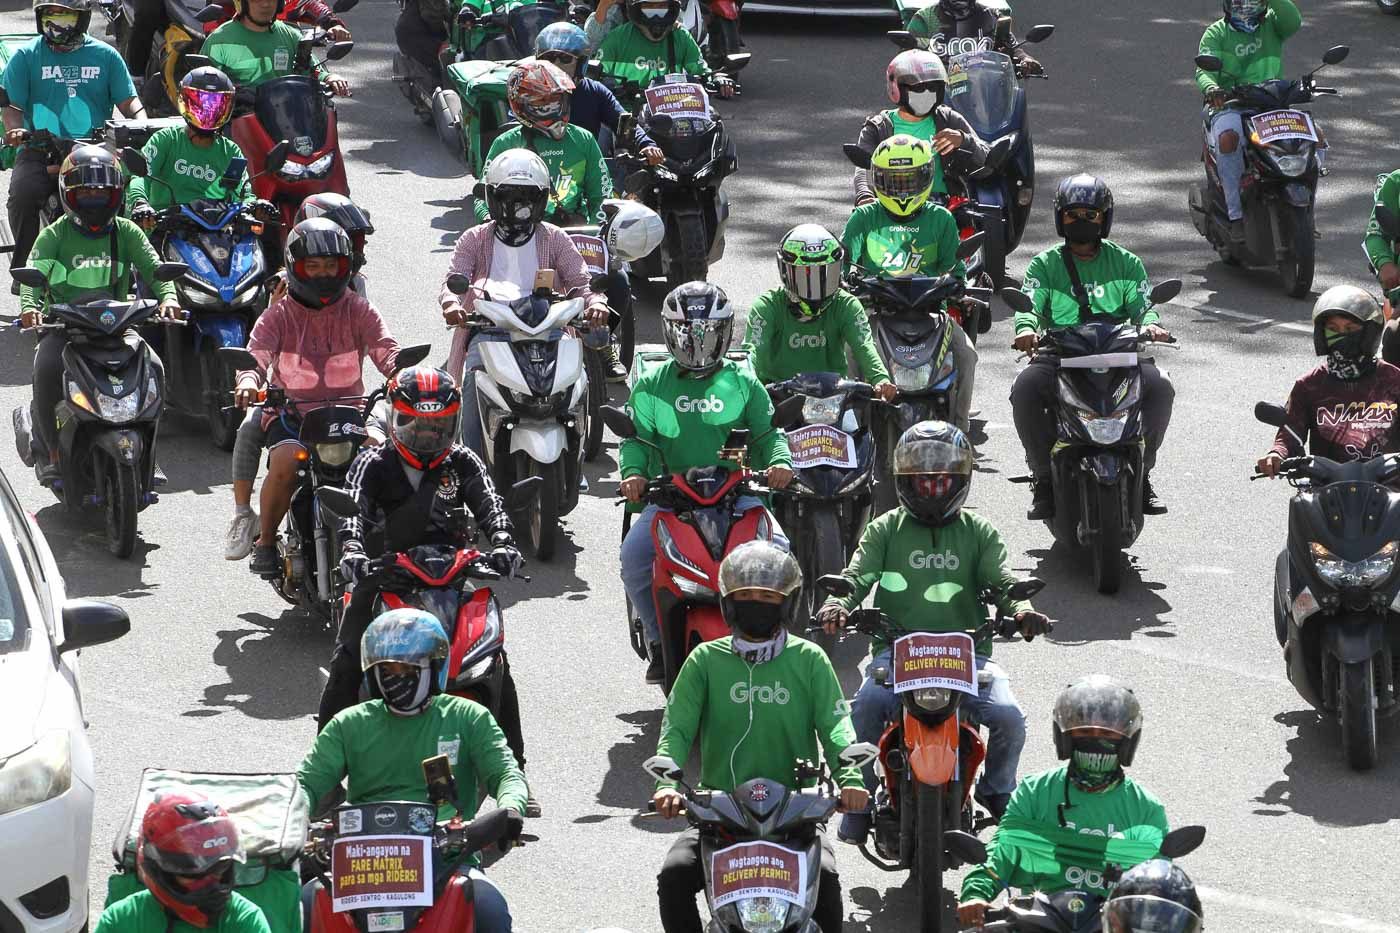 Grab says drivers earn more than minimum wage, but ‘social protection’ needed